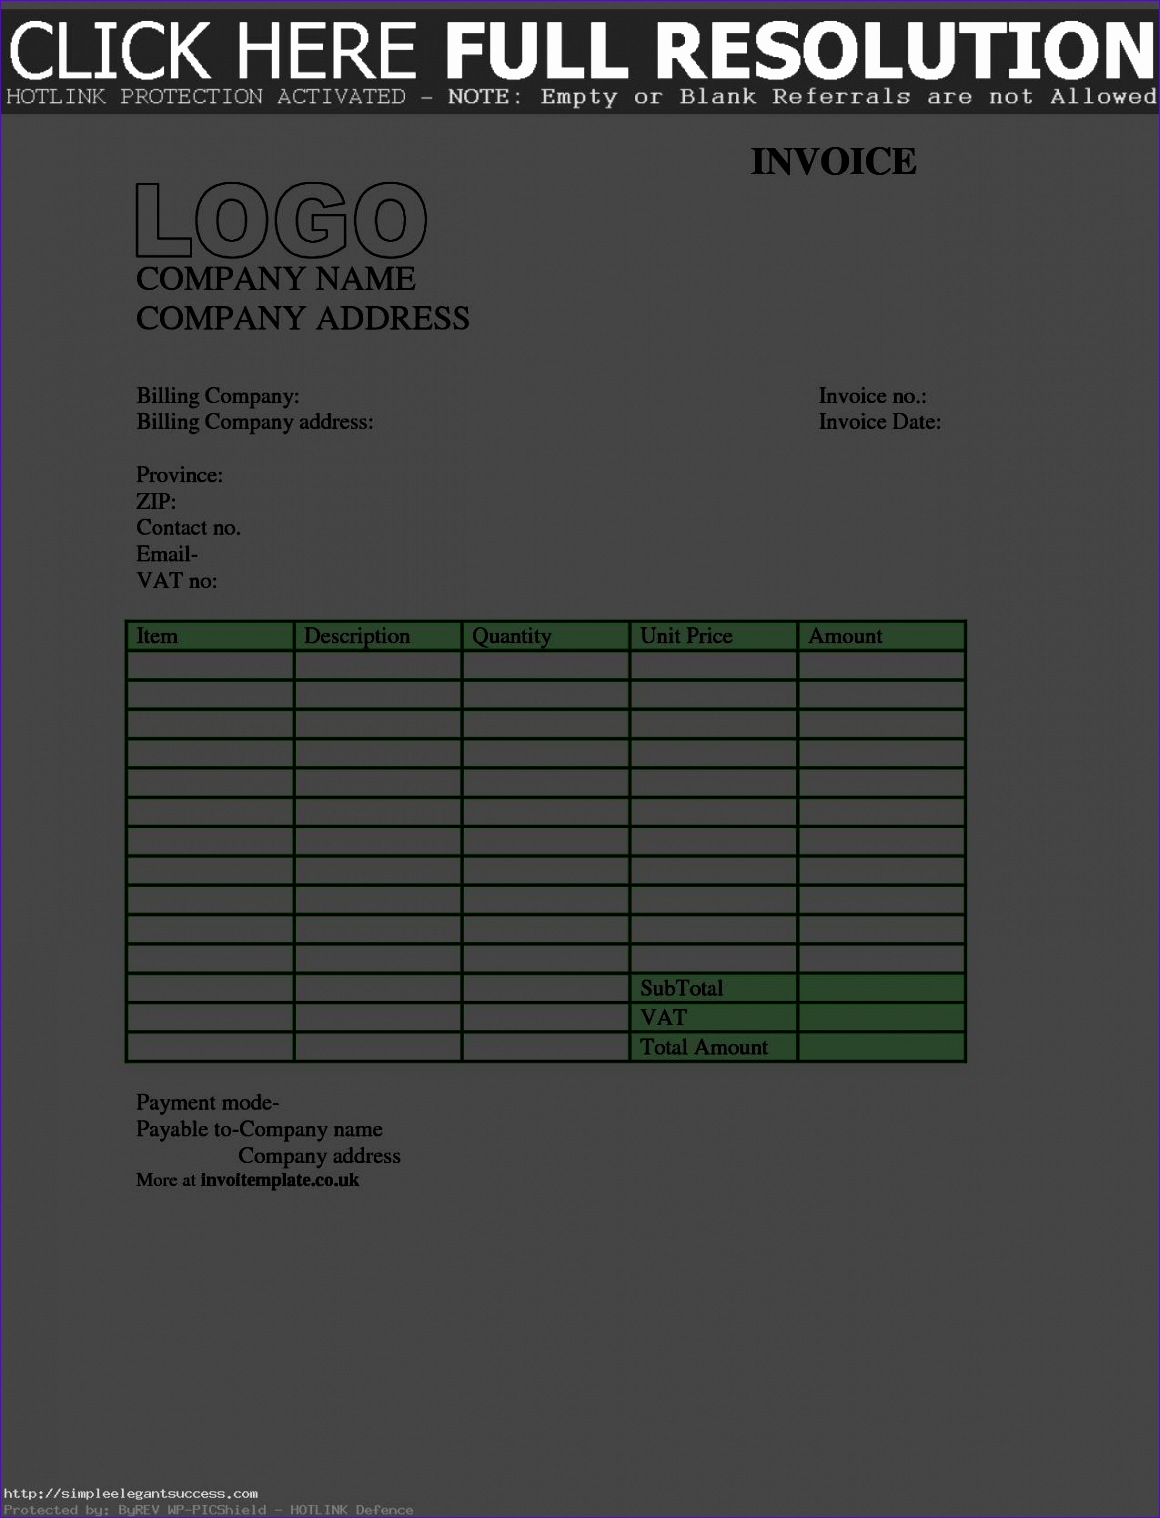 free online invoice templates resume invoices excel templa microsoft word pdf uk for works mac office